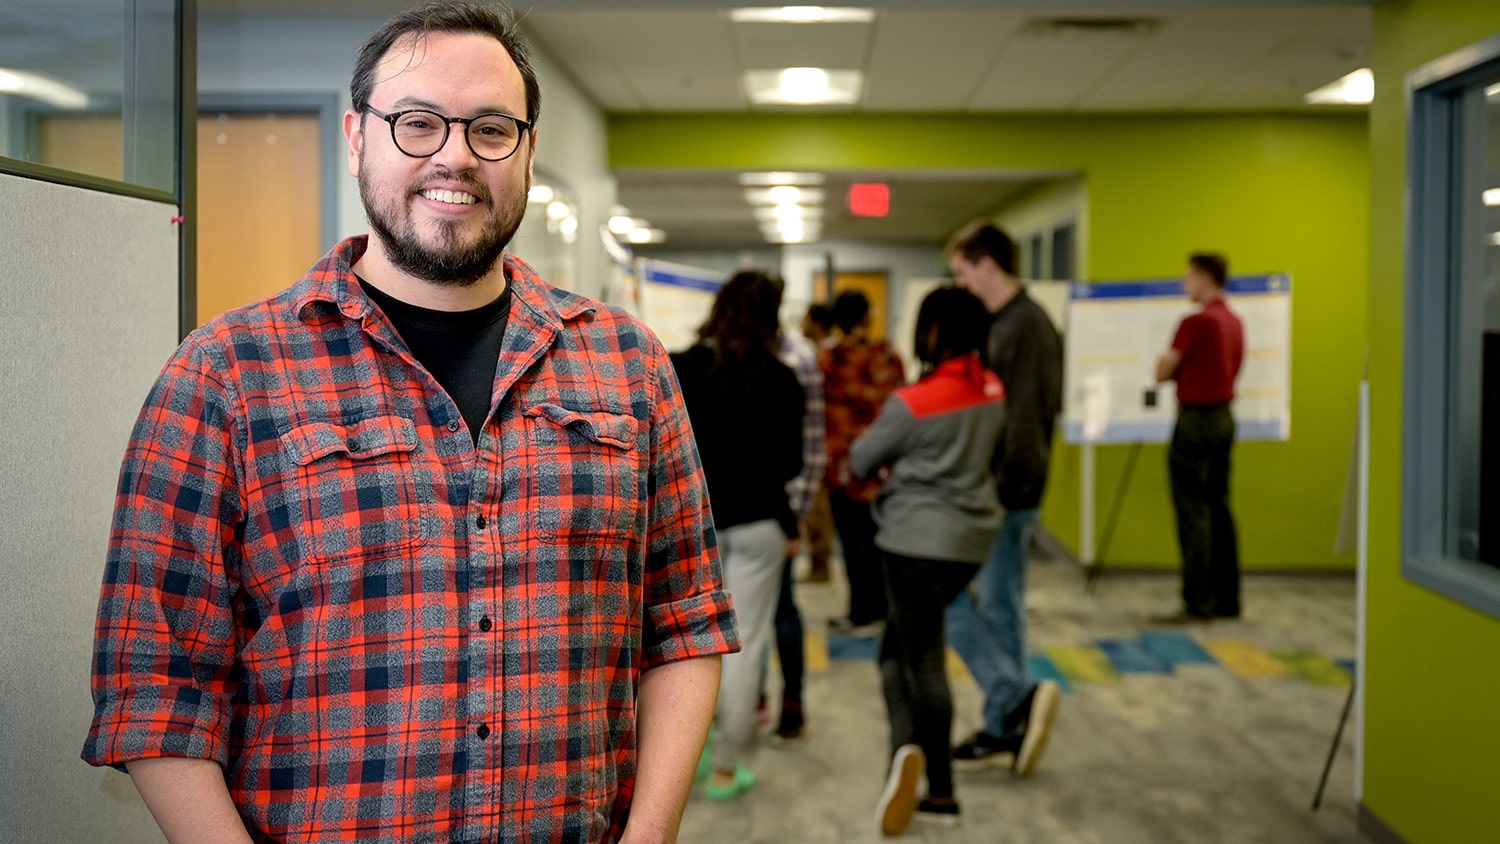 Ben Hines, a graduate physics student, is a key part of the new partnership between the Organic and Carbon Electronics faculty cluster and Wake Technical Community College's STEM Academic Research and Training Program.